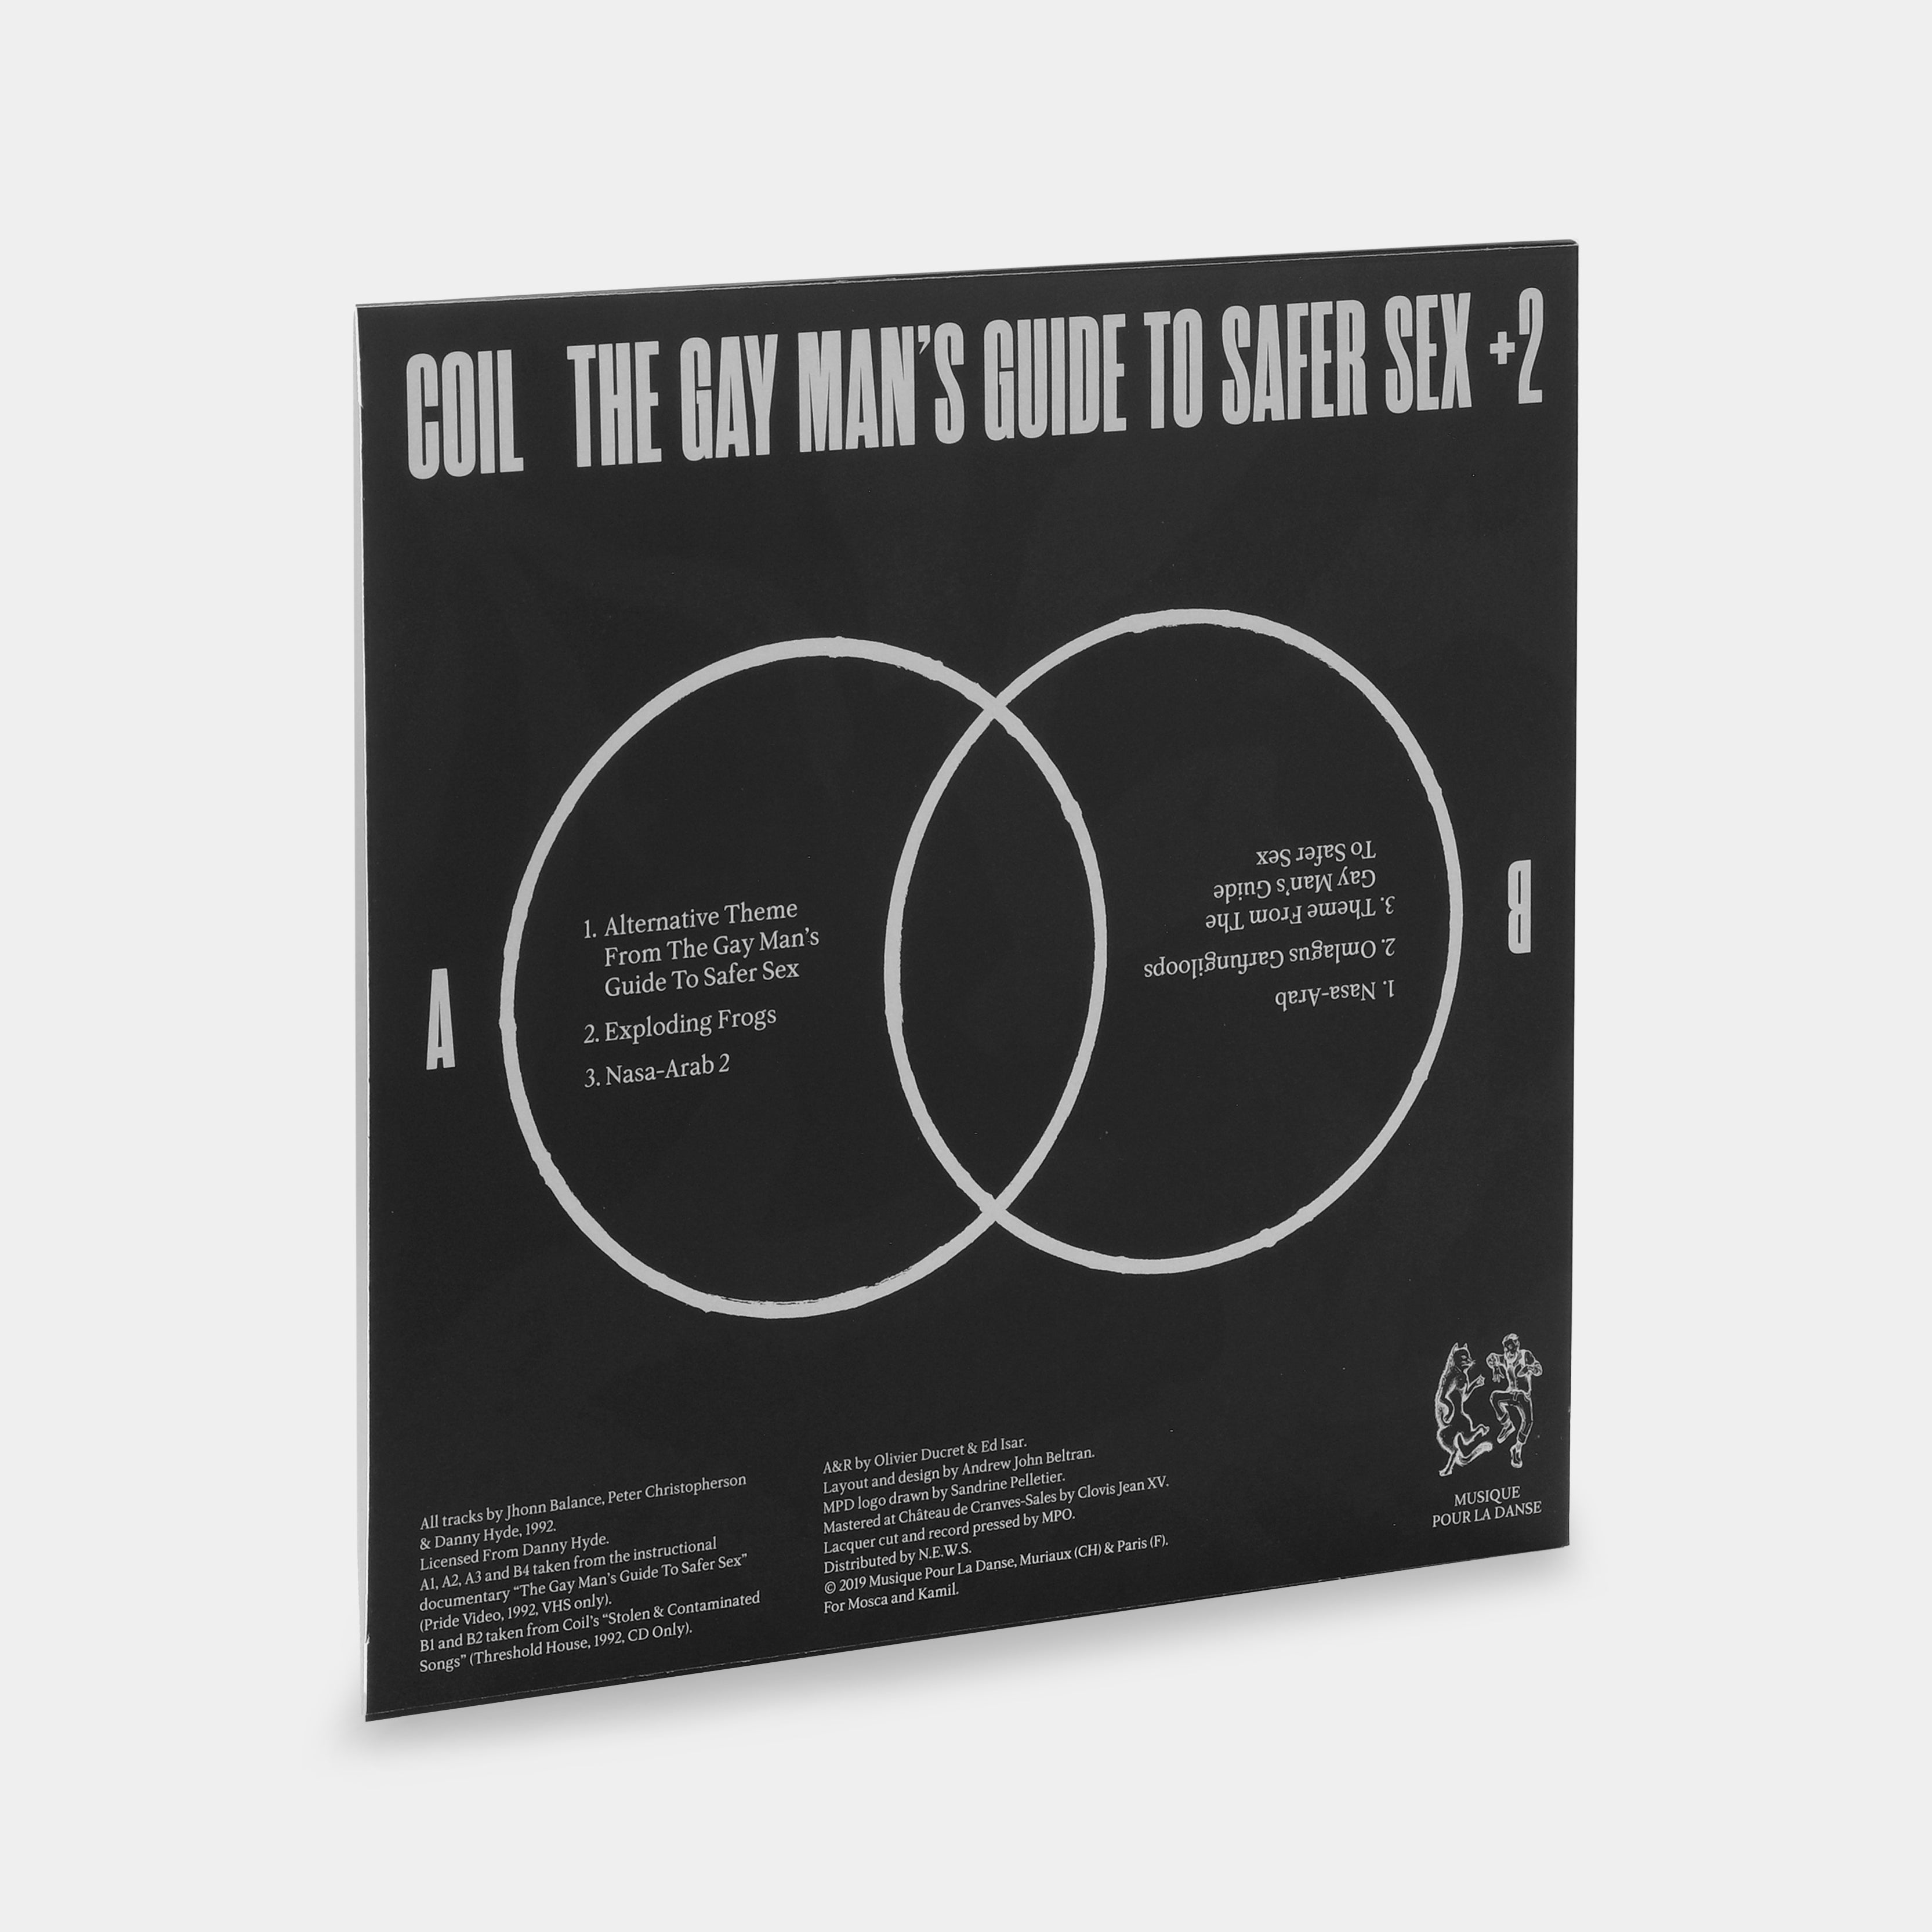 Coil - Theme From The Gay Man's Guide To Safer Sex +2 LP Vinyl Record